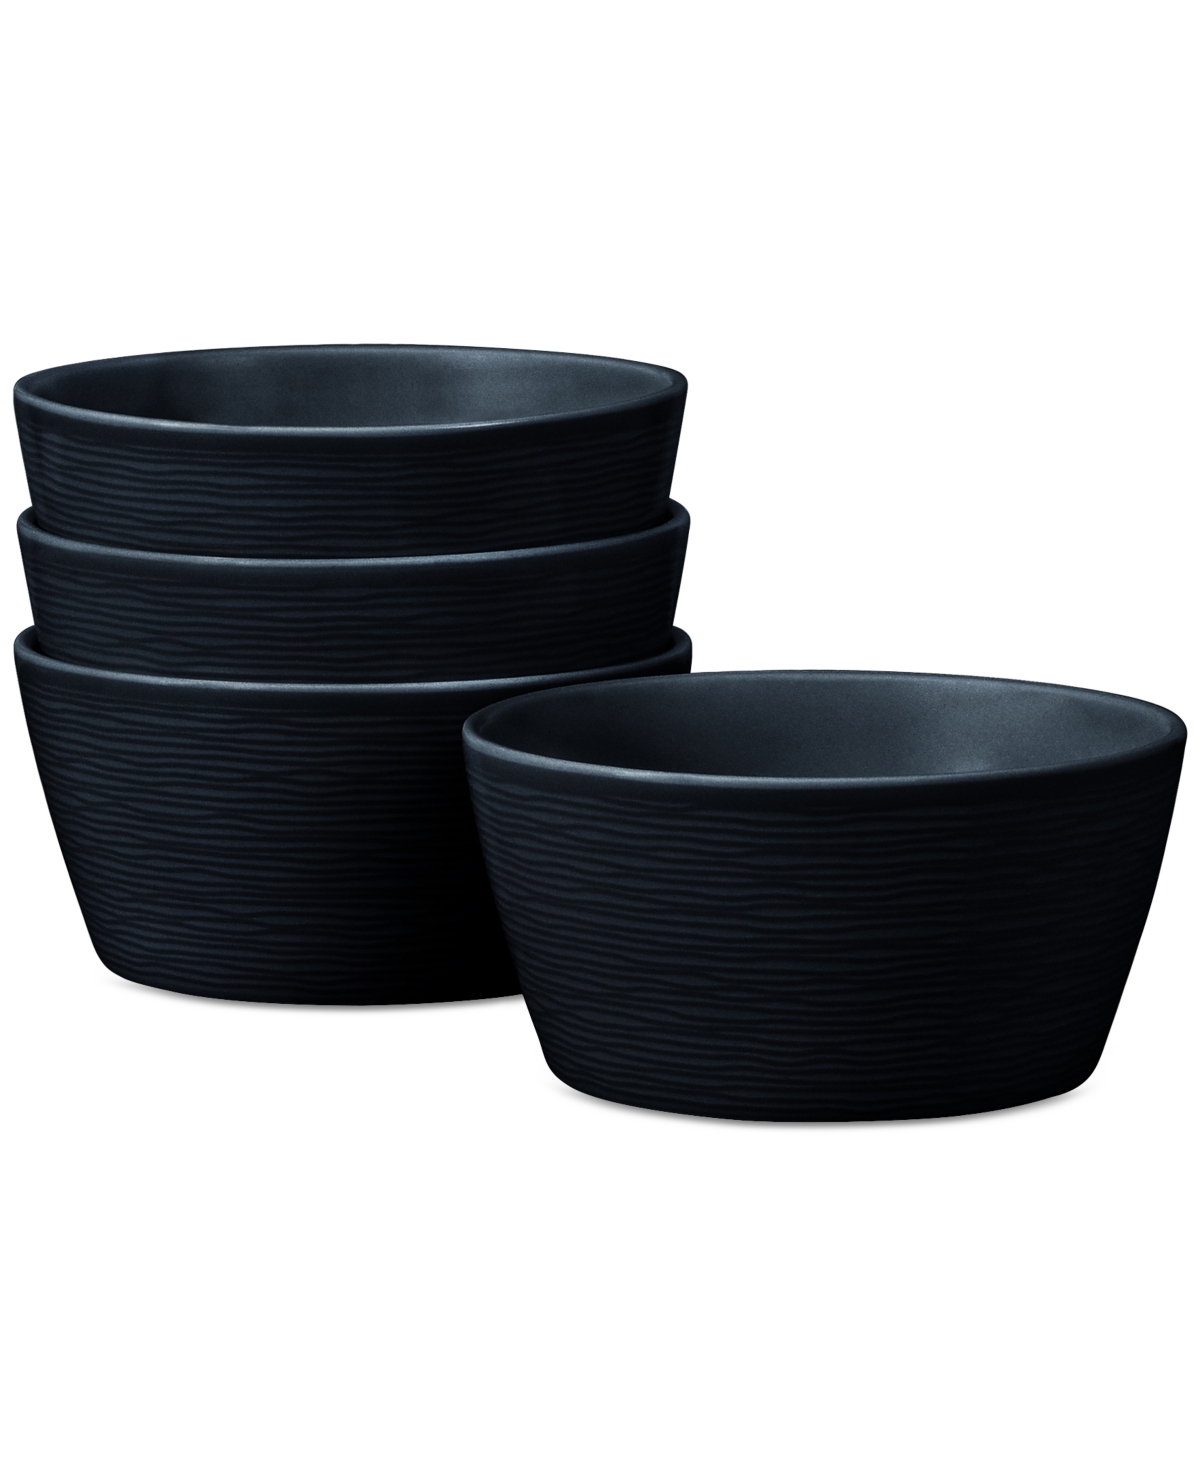 Swirl Cereal Bowls, Set of 4 - Navy